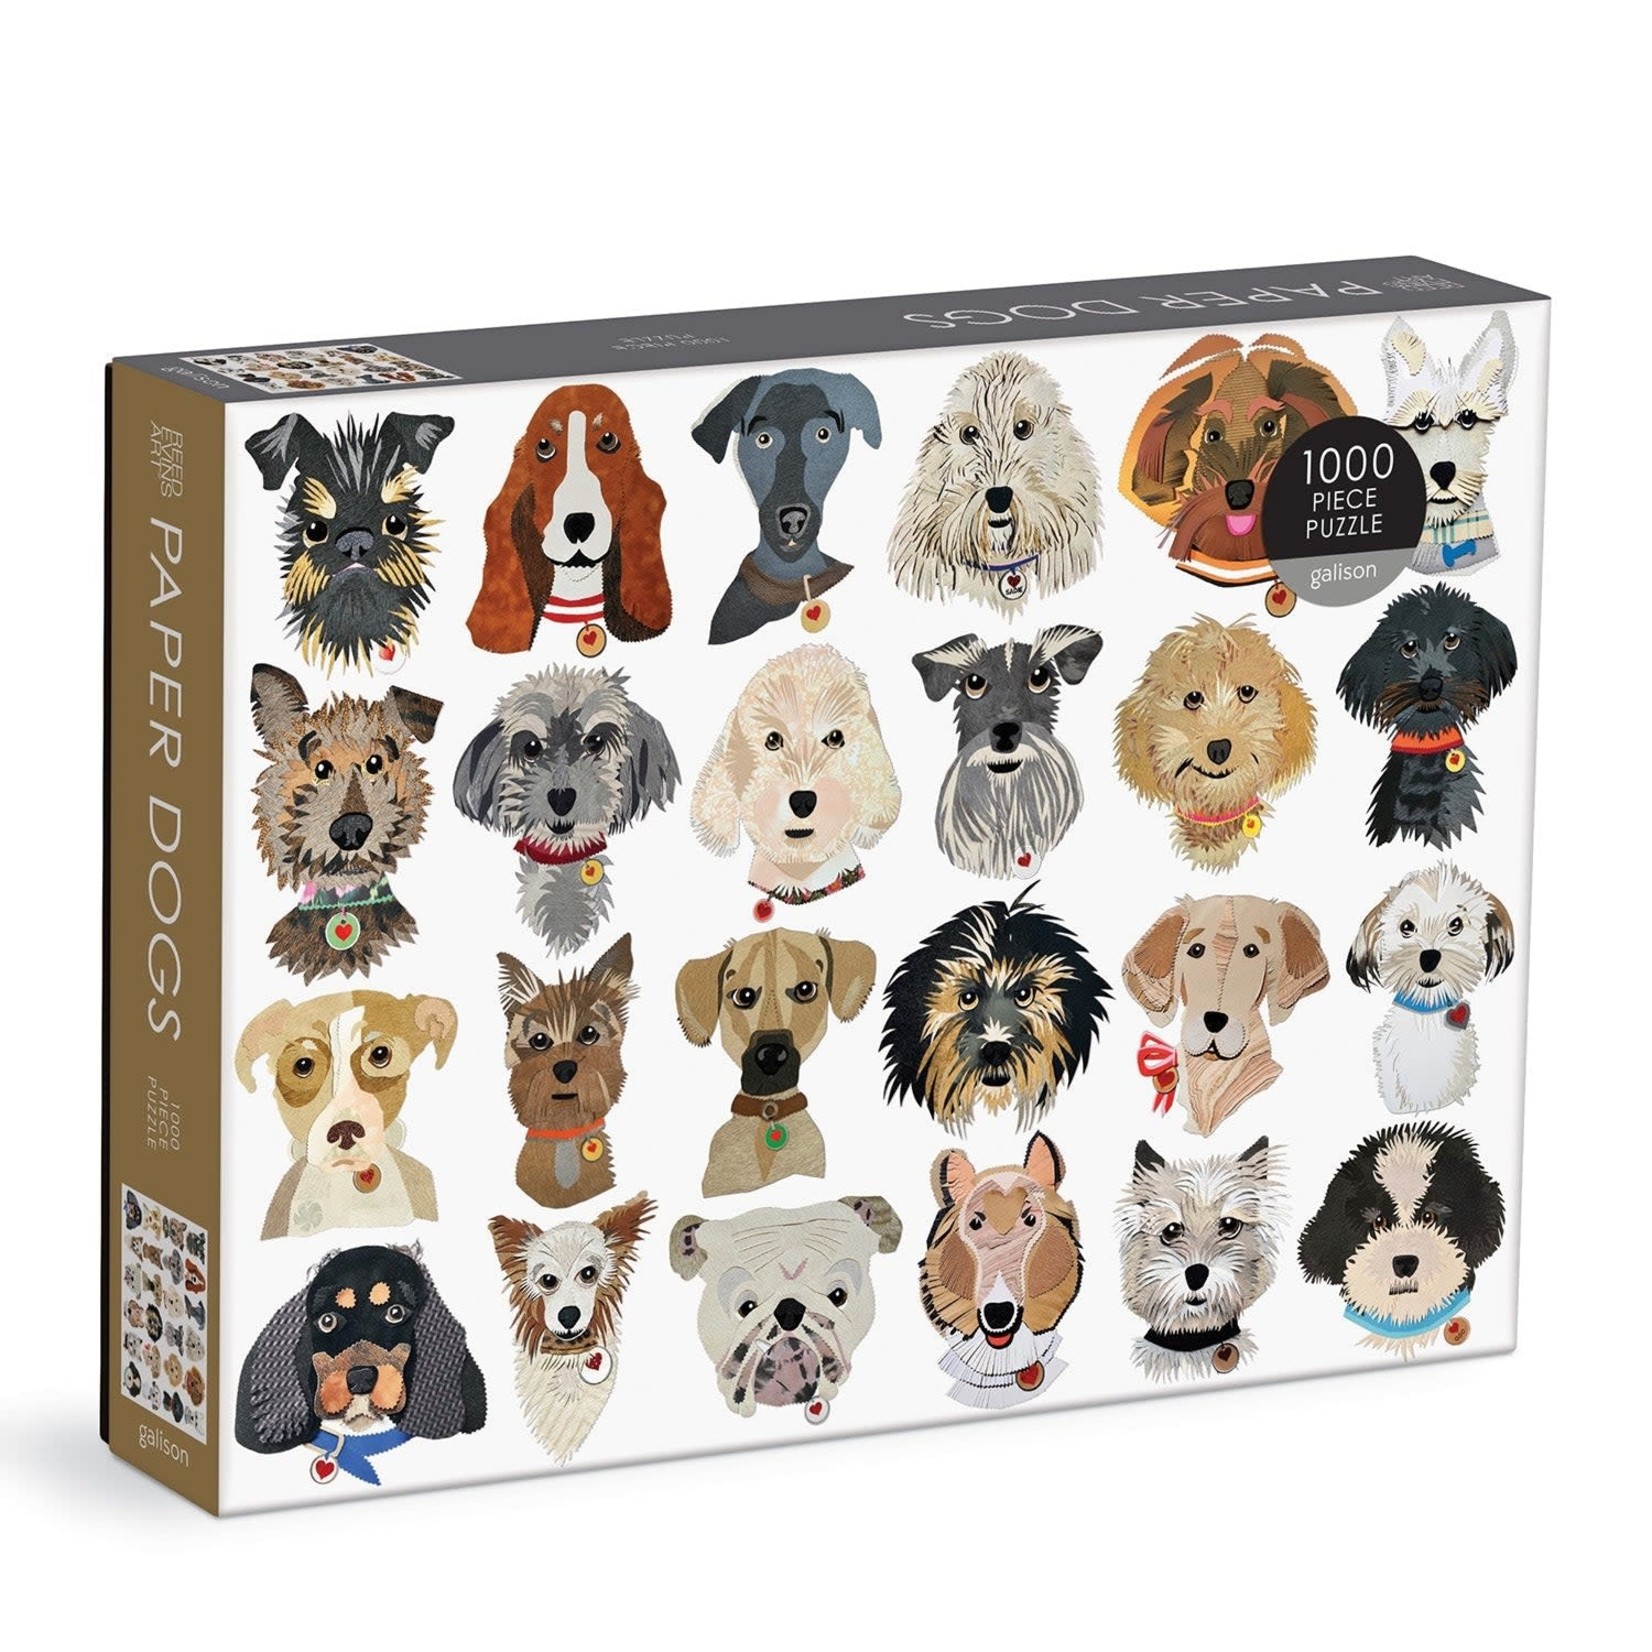 galison Paper Dog 750 Piece Shaped Jigsaw Puzzle